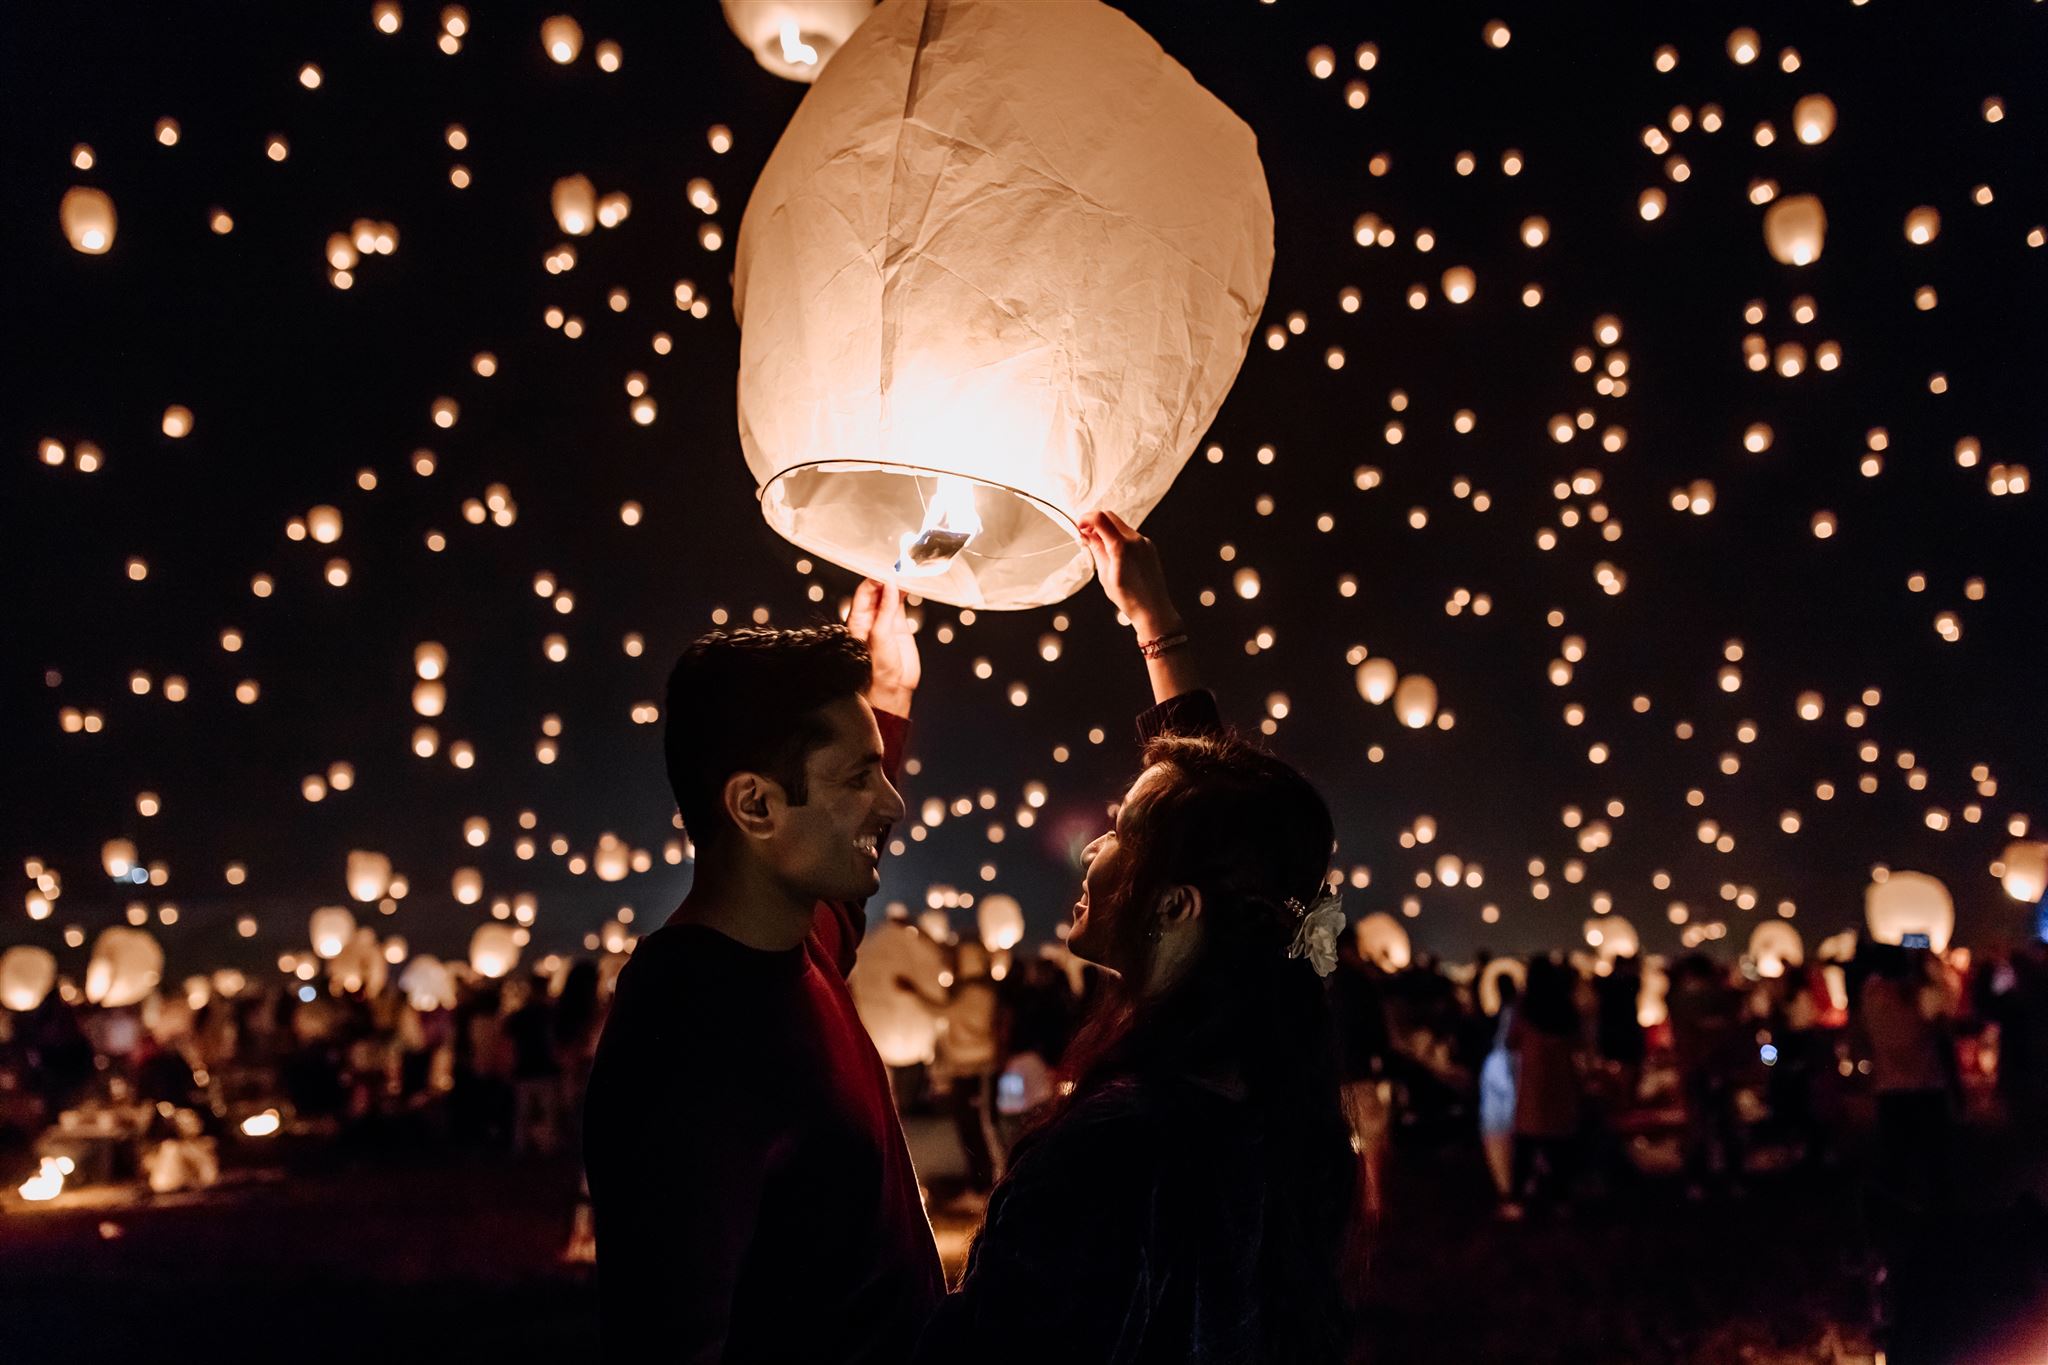 Canton adopts ban on sky lanterns, citing fire risk